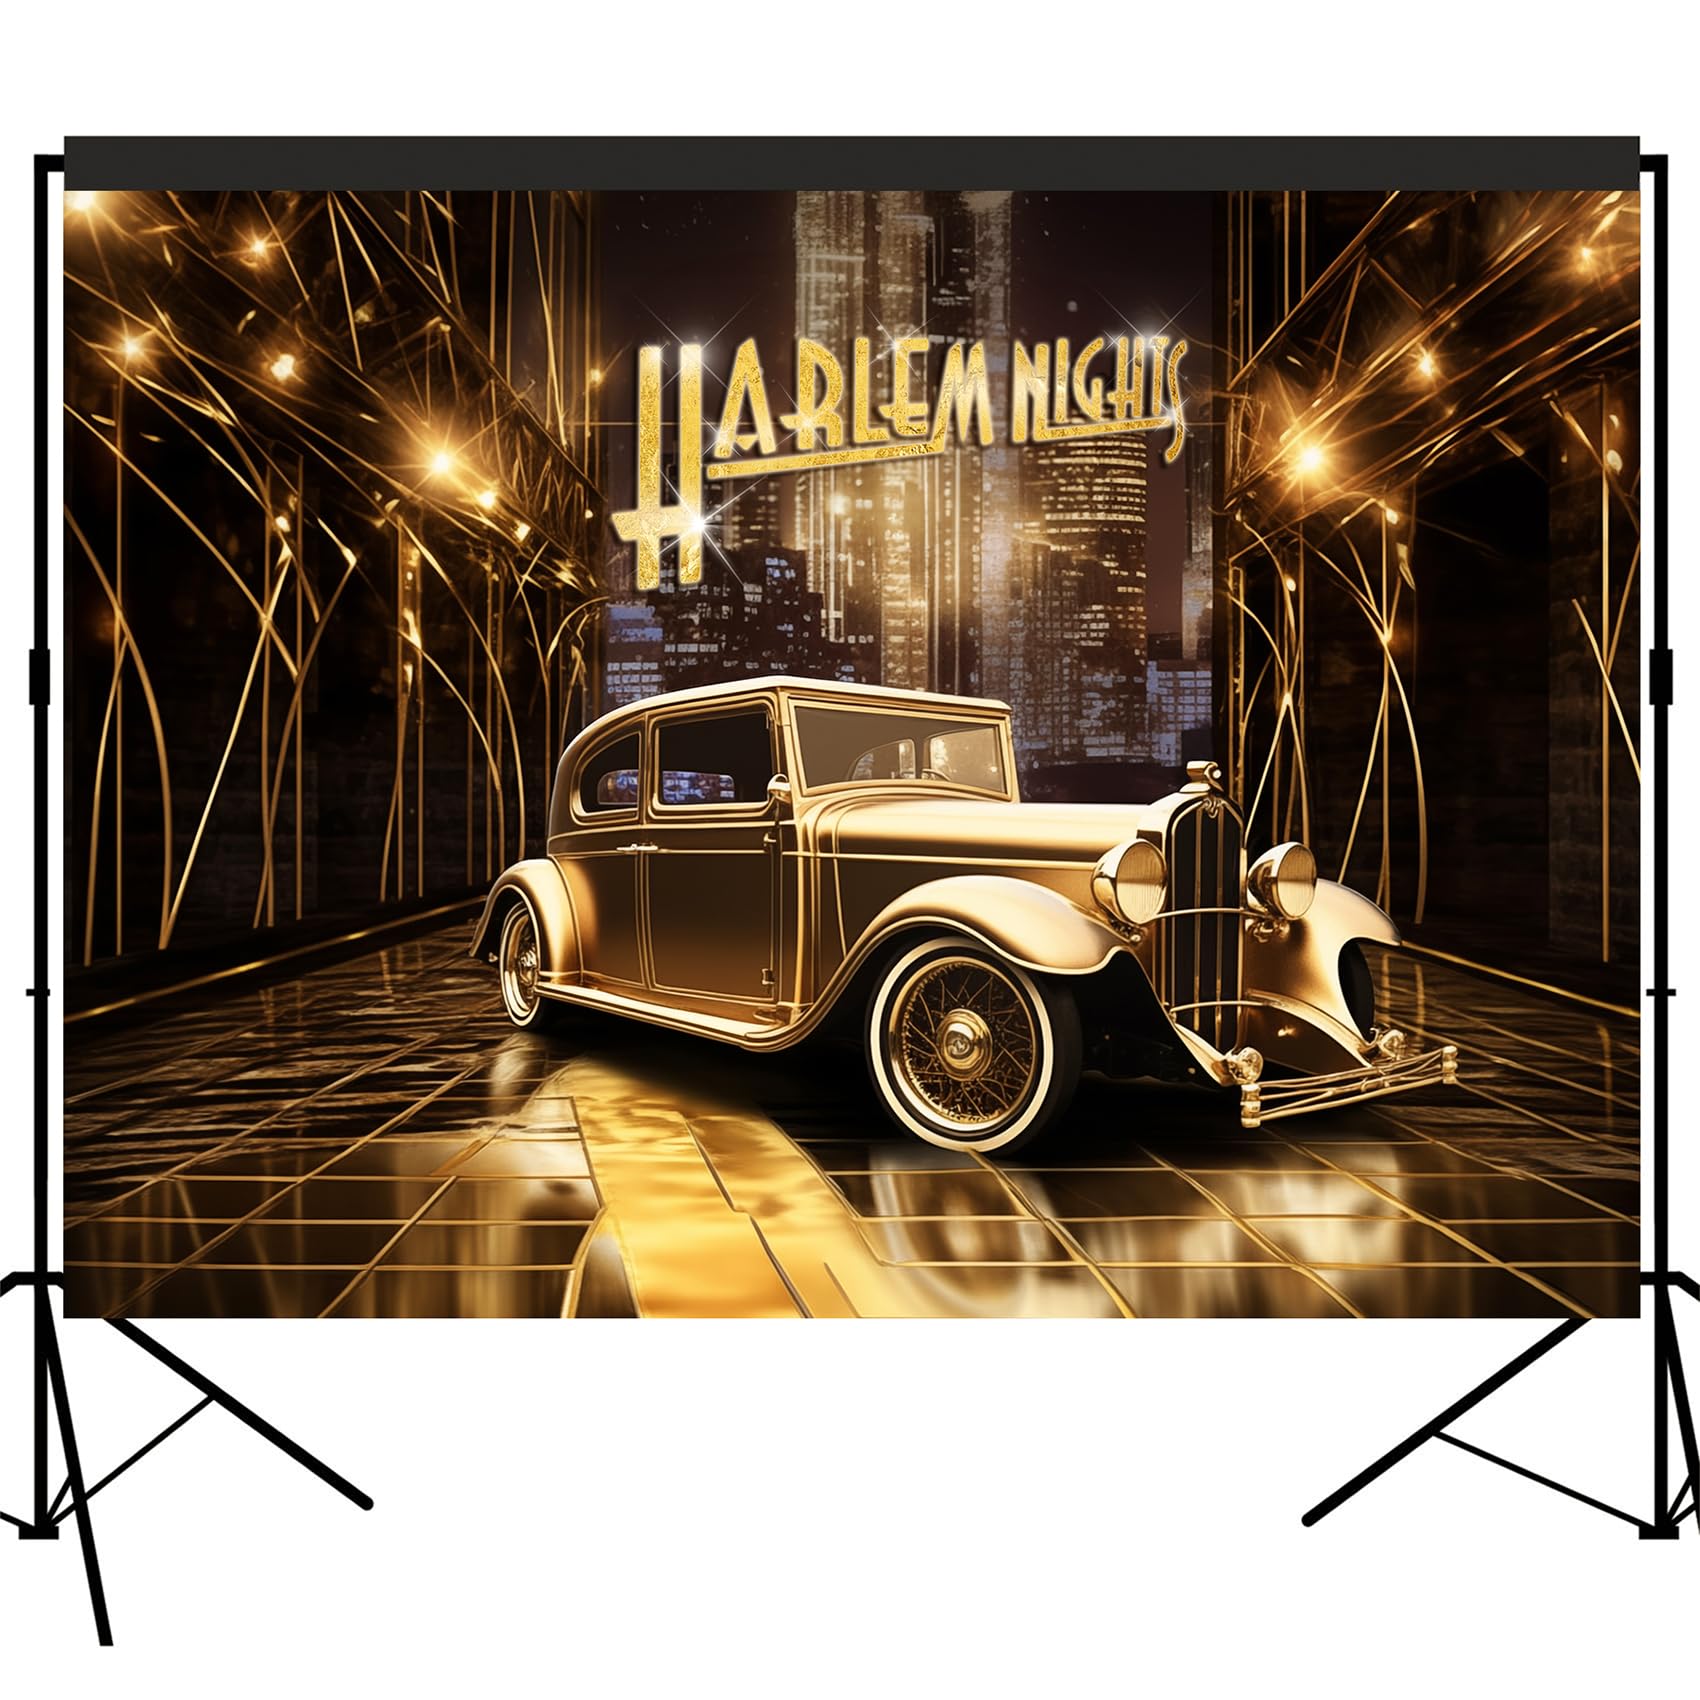 Harlem Nights Backdrop Photography Background 7x5feet Studio Photo Booth Props